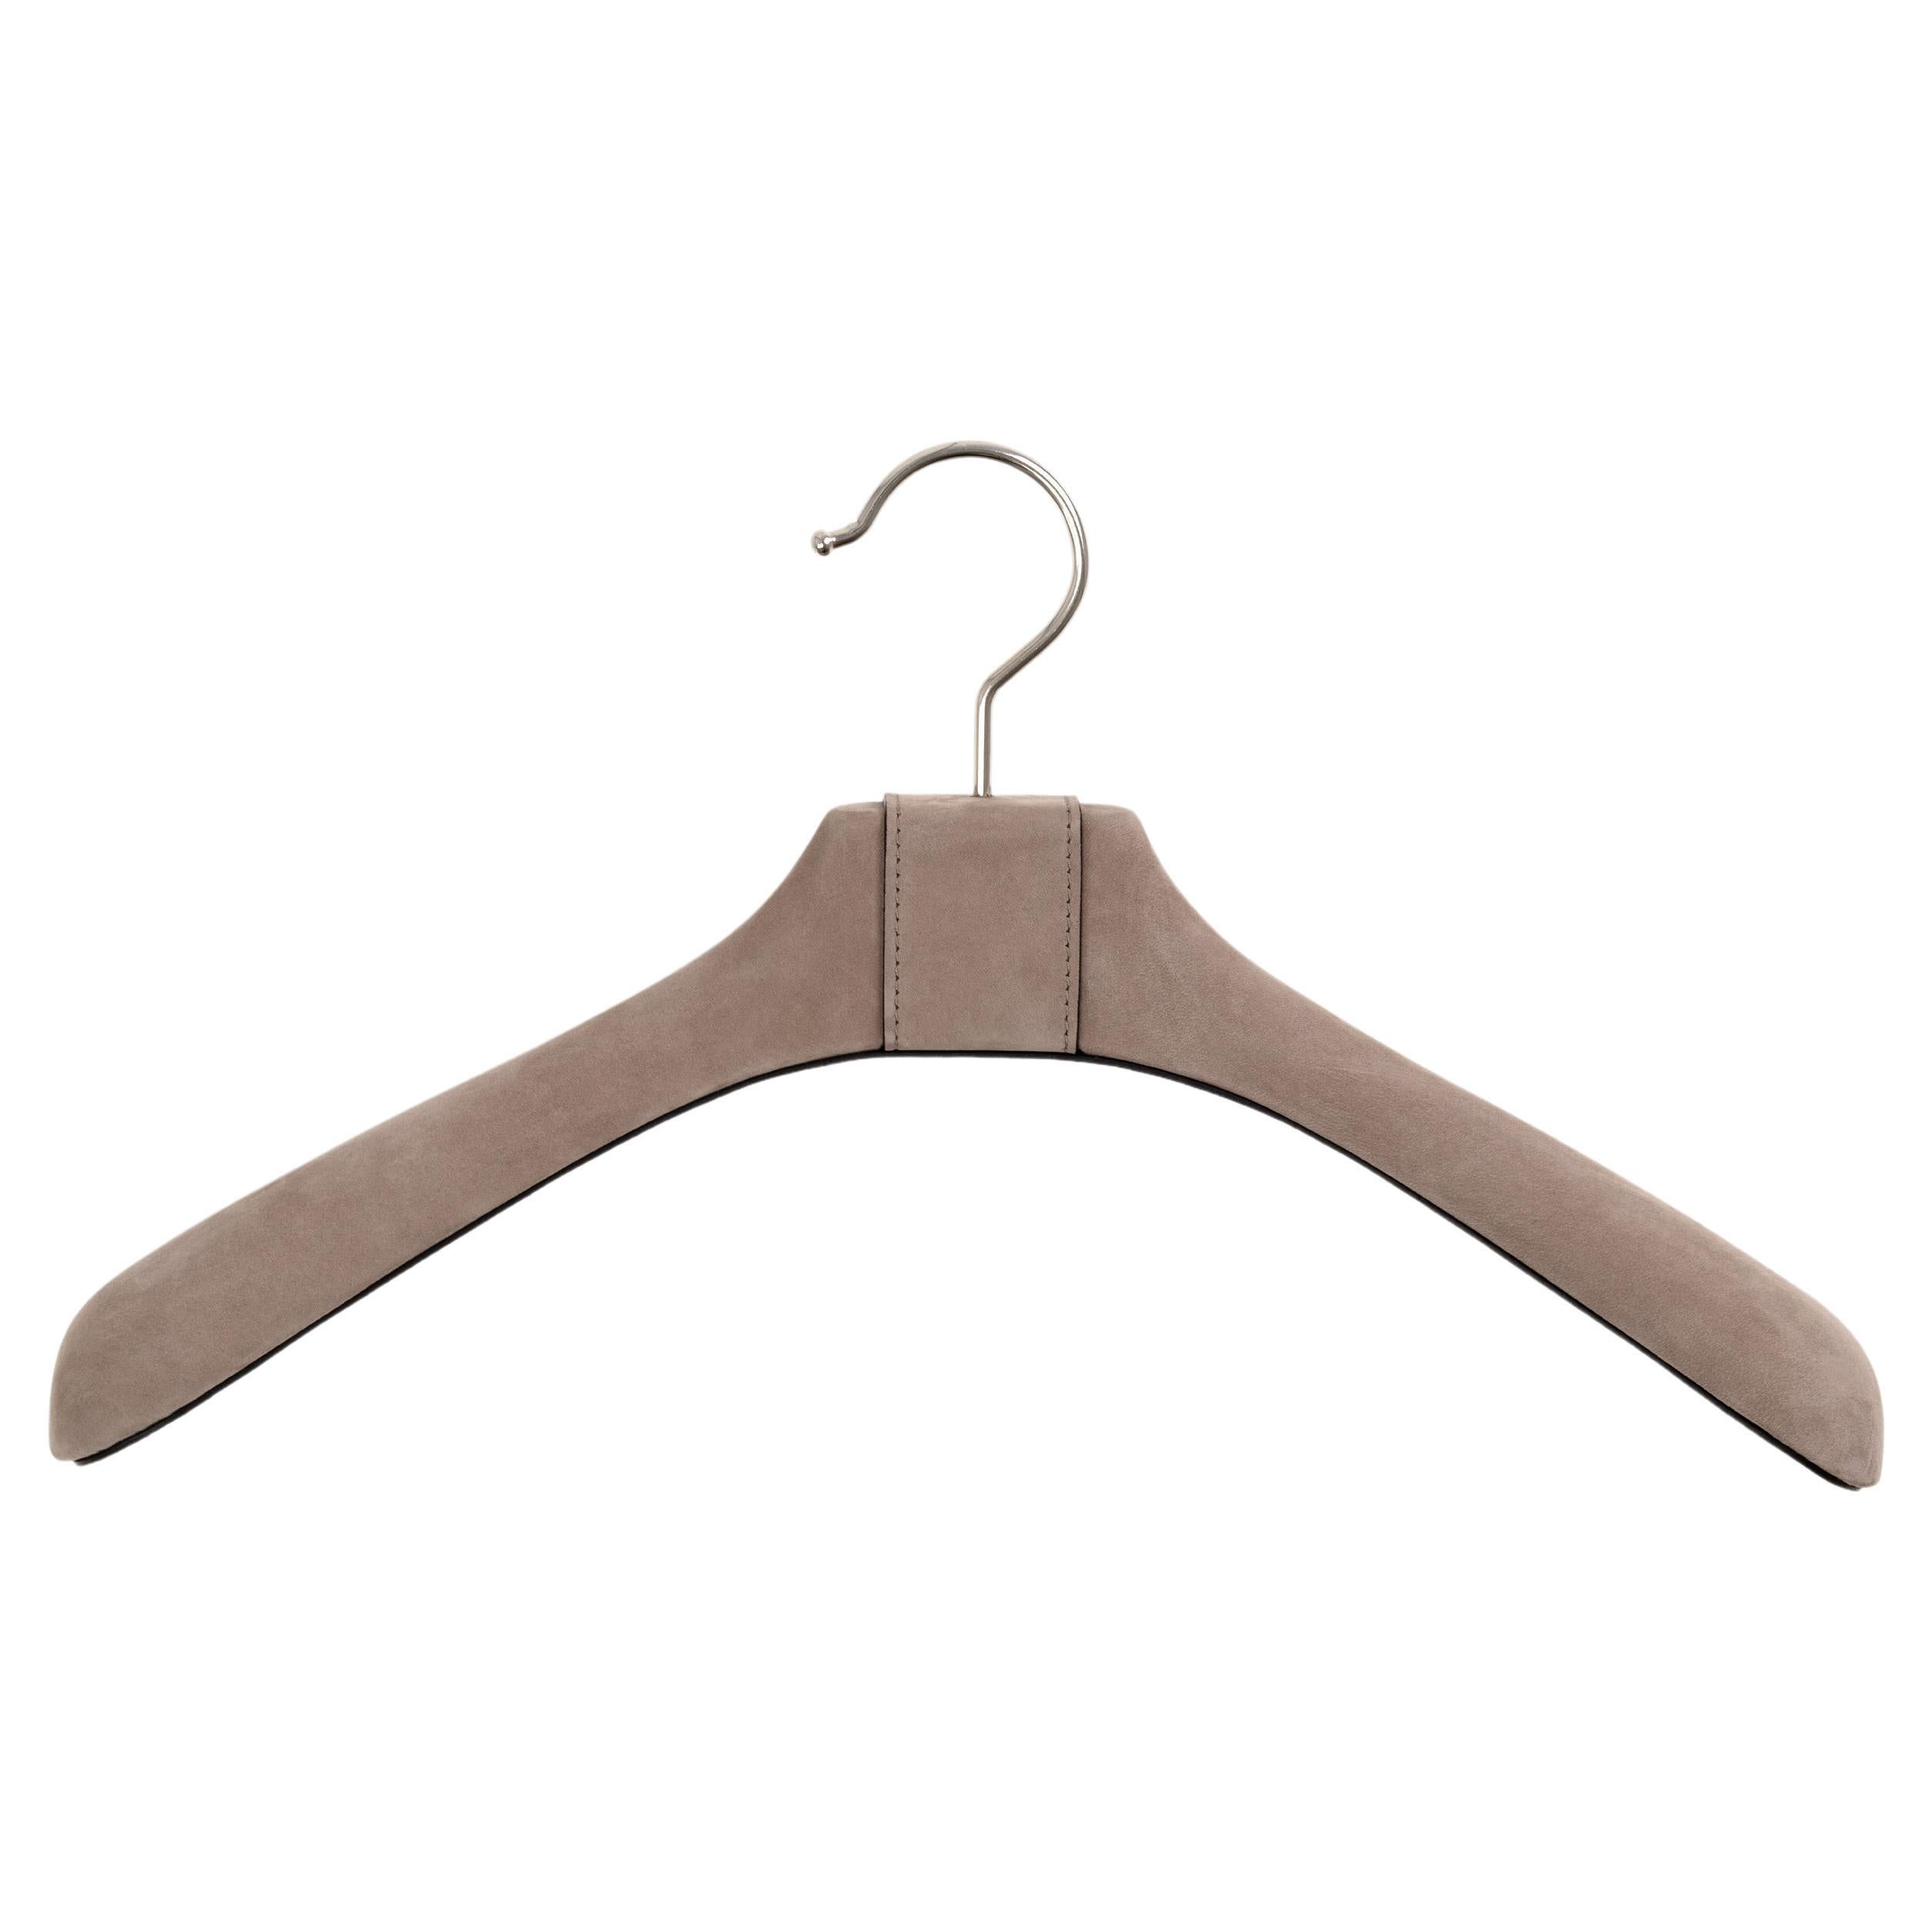 21st Century Coat Hanger Full Covered in Real Leather Handcrafted in Italy